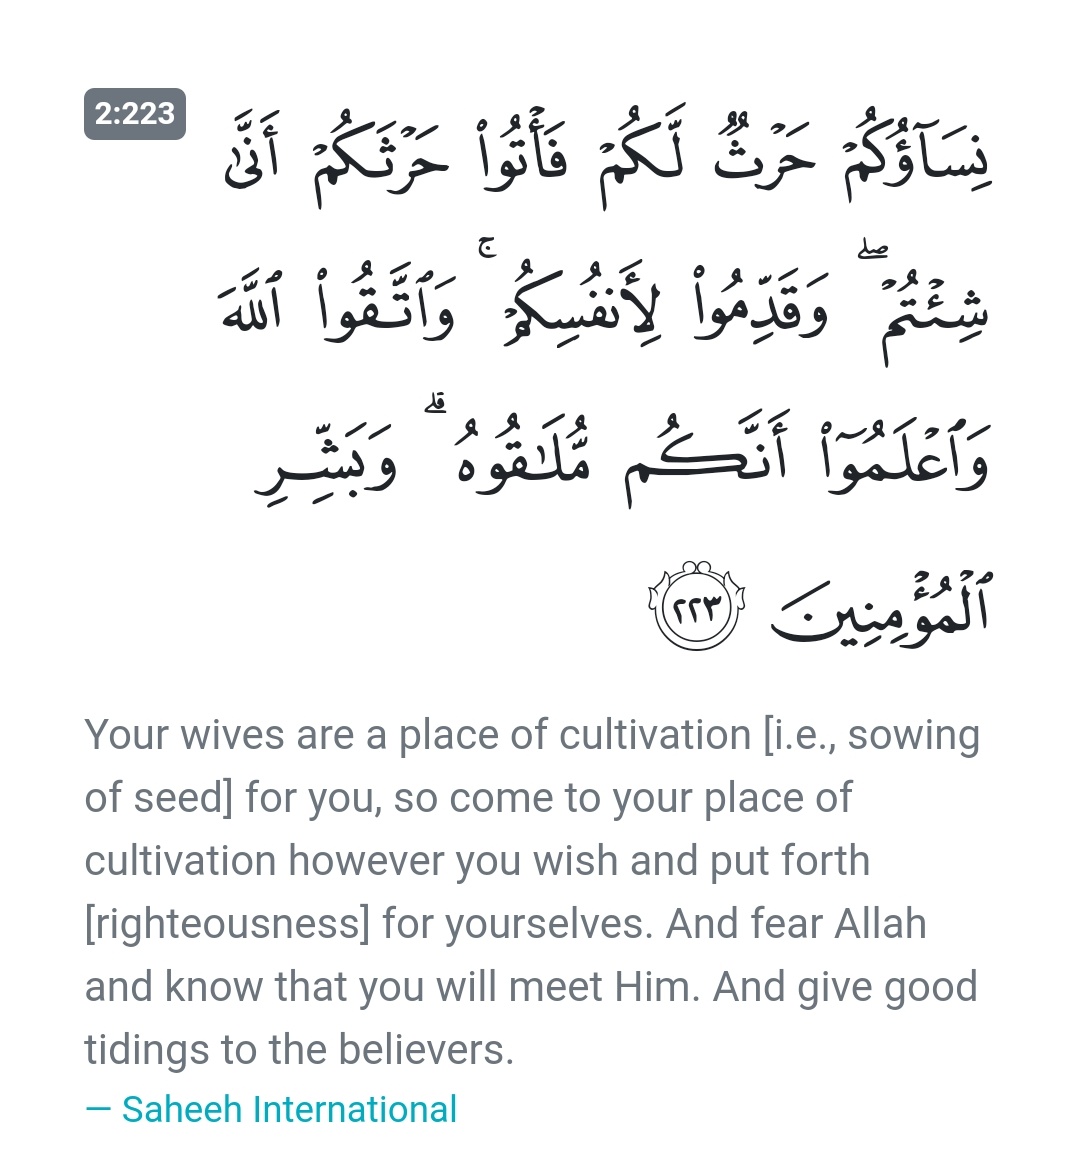 While in the Quran (2:223), a speech addressing men informs them: "Your wives are a place of cultivation for you, so come to your place of cultivation however you wish..." 3/4